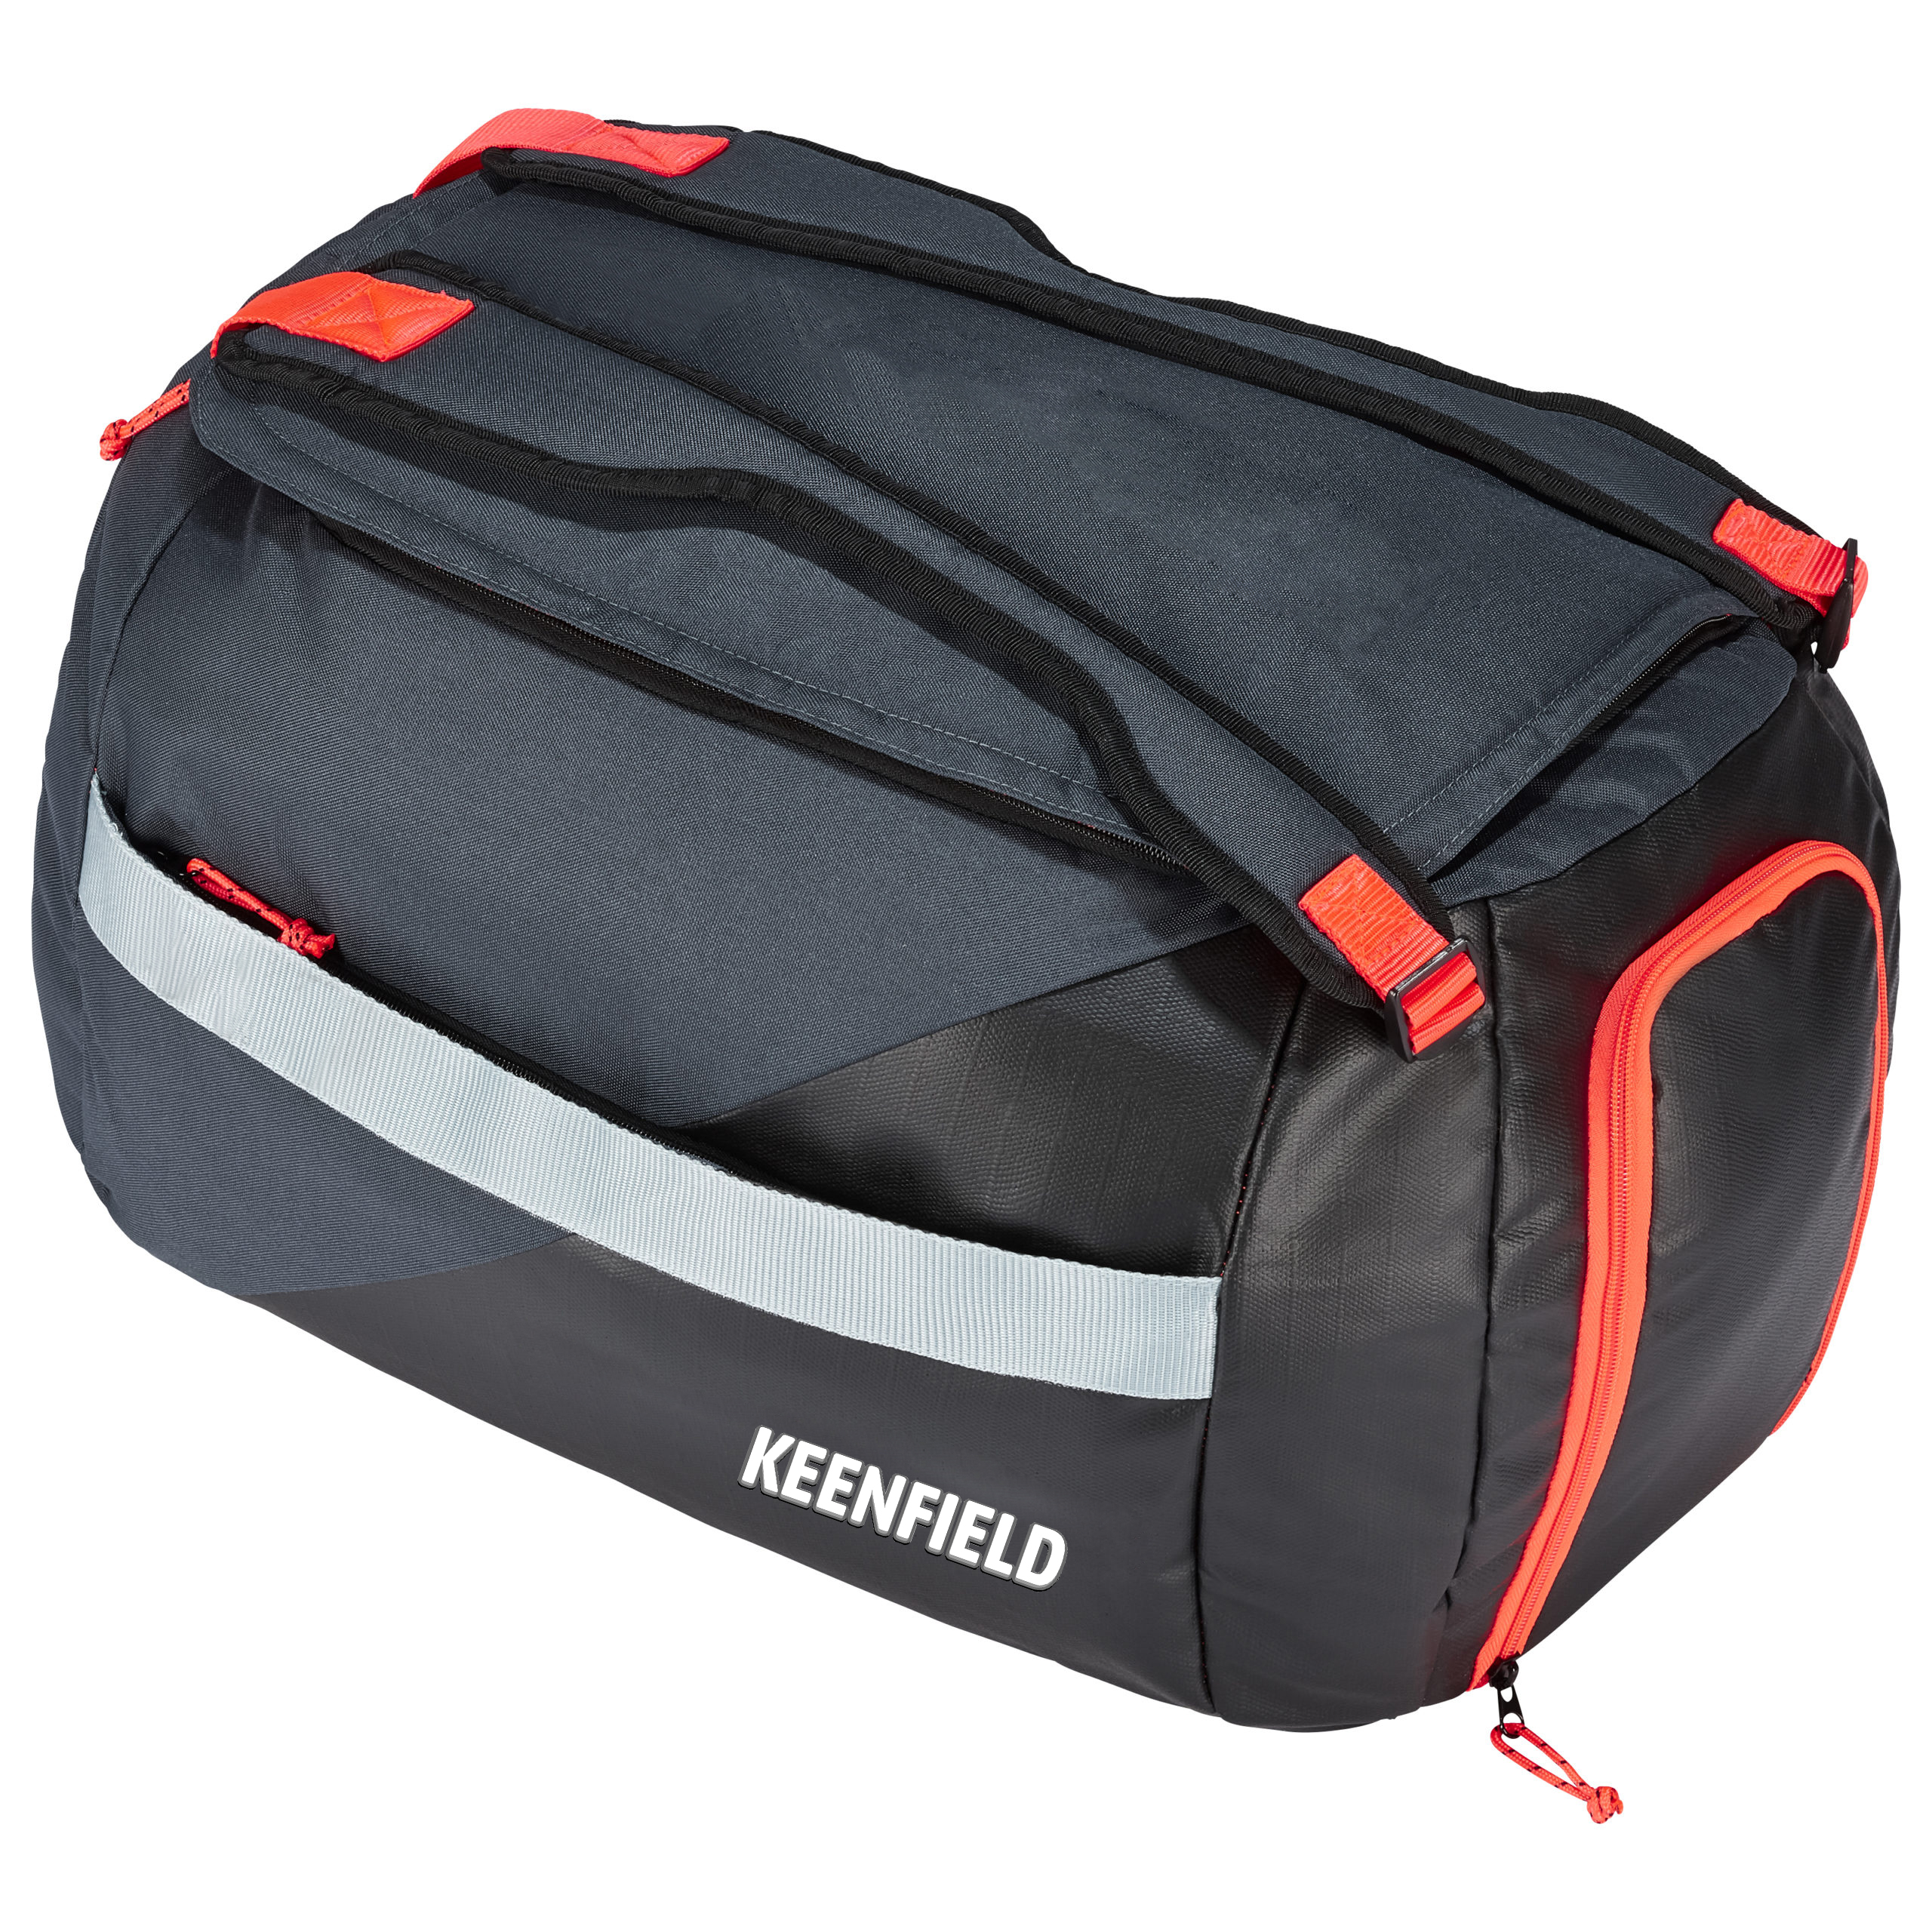 Gym Duffle Bag for Women Men Sports Bags Travel Duffel Bags with Shoe Compartment